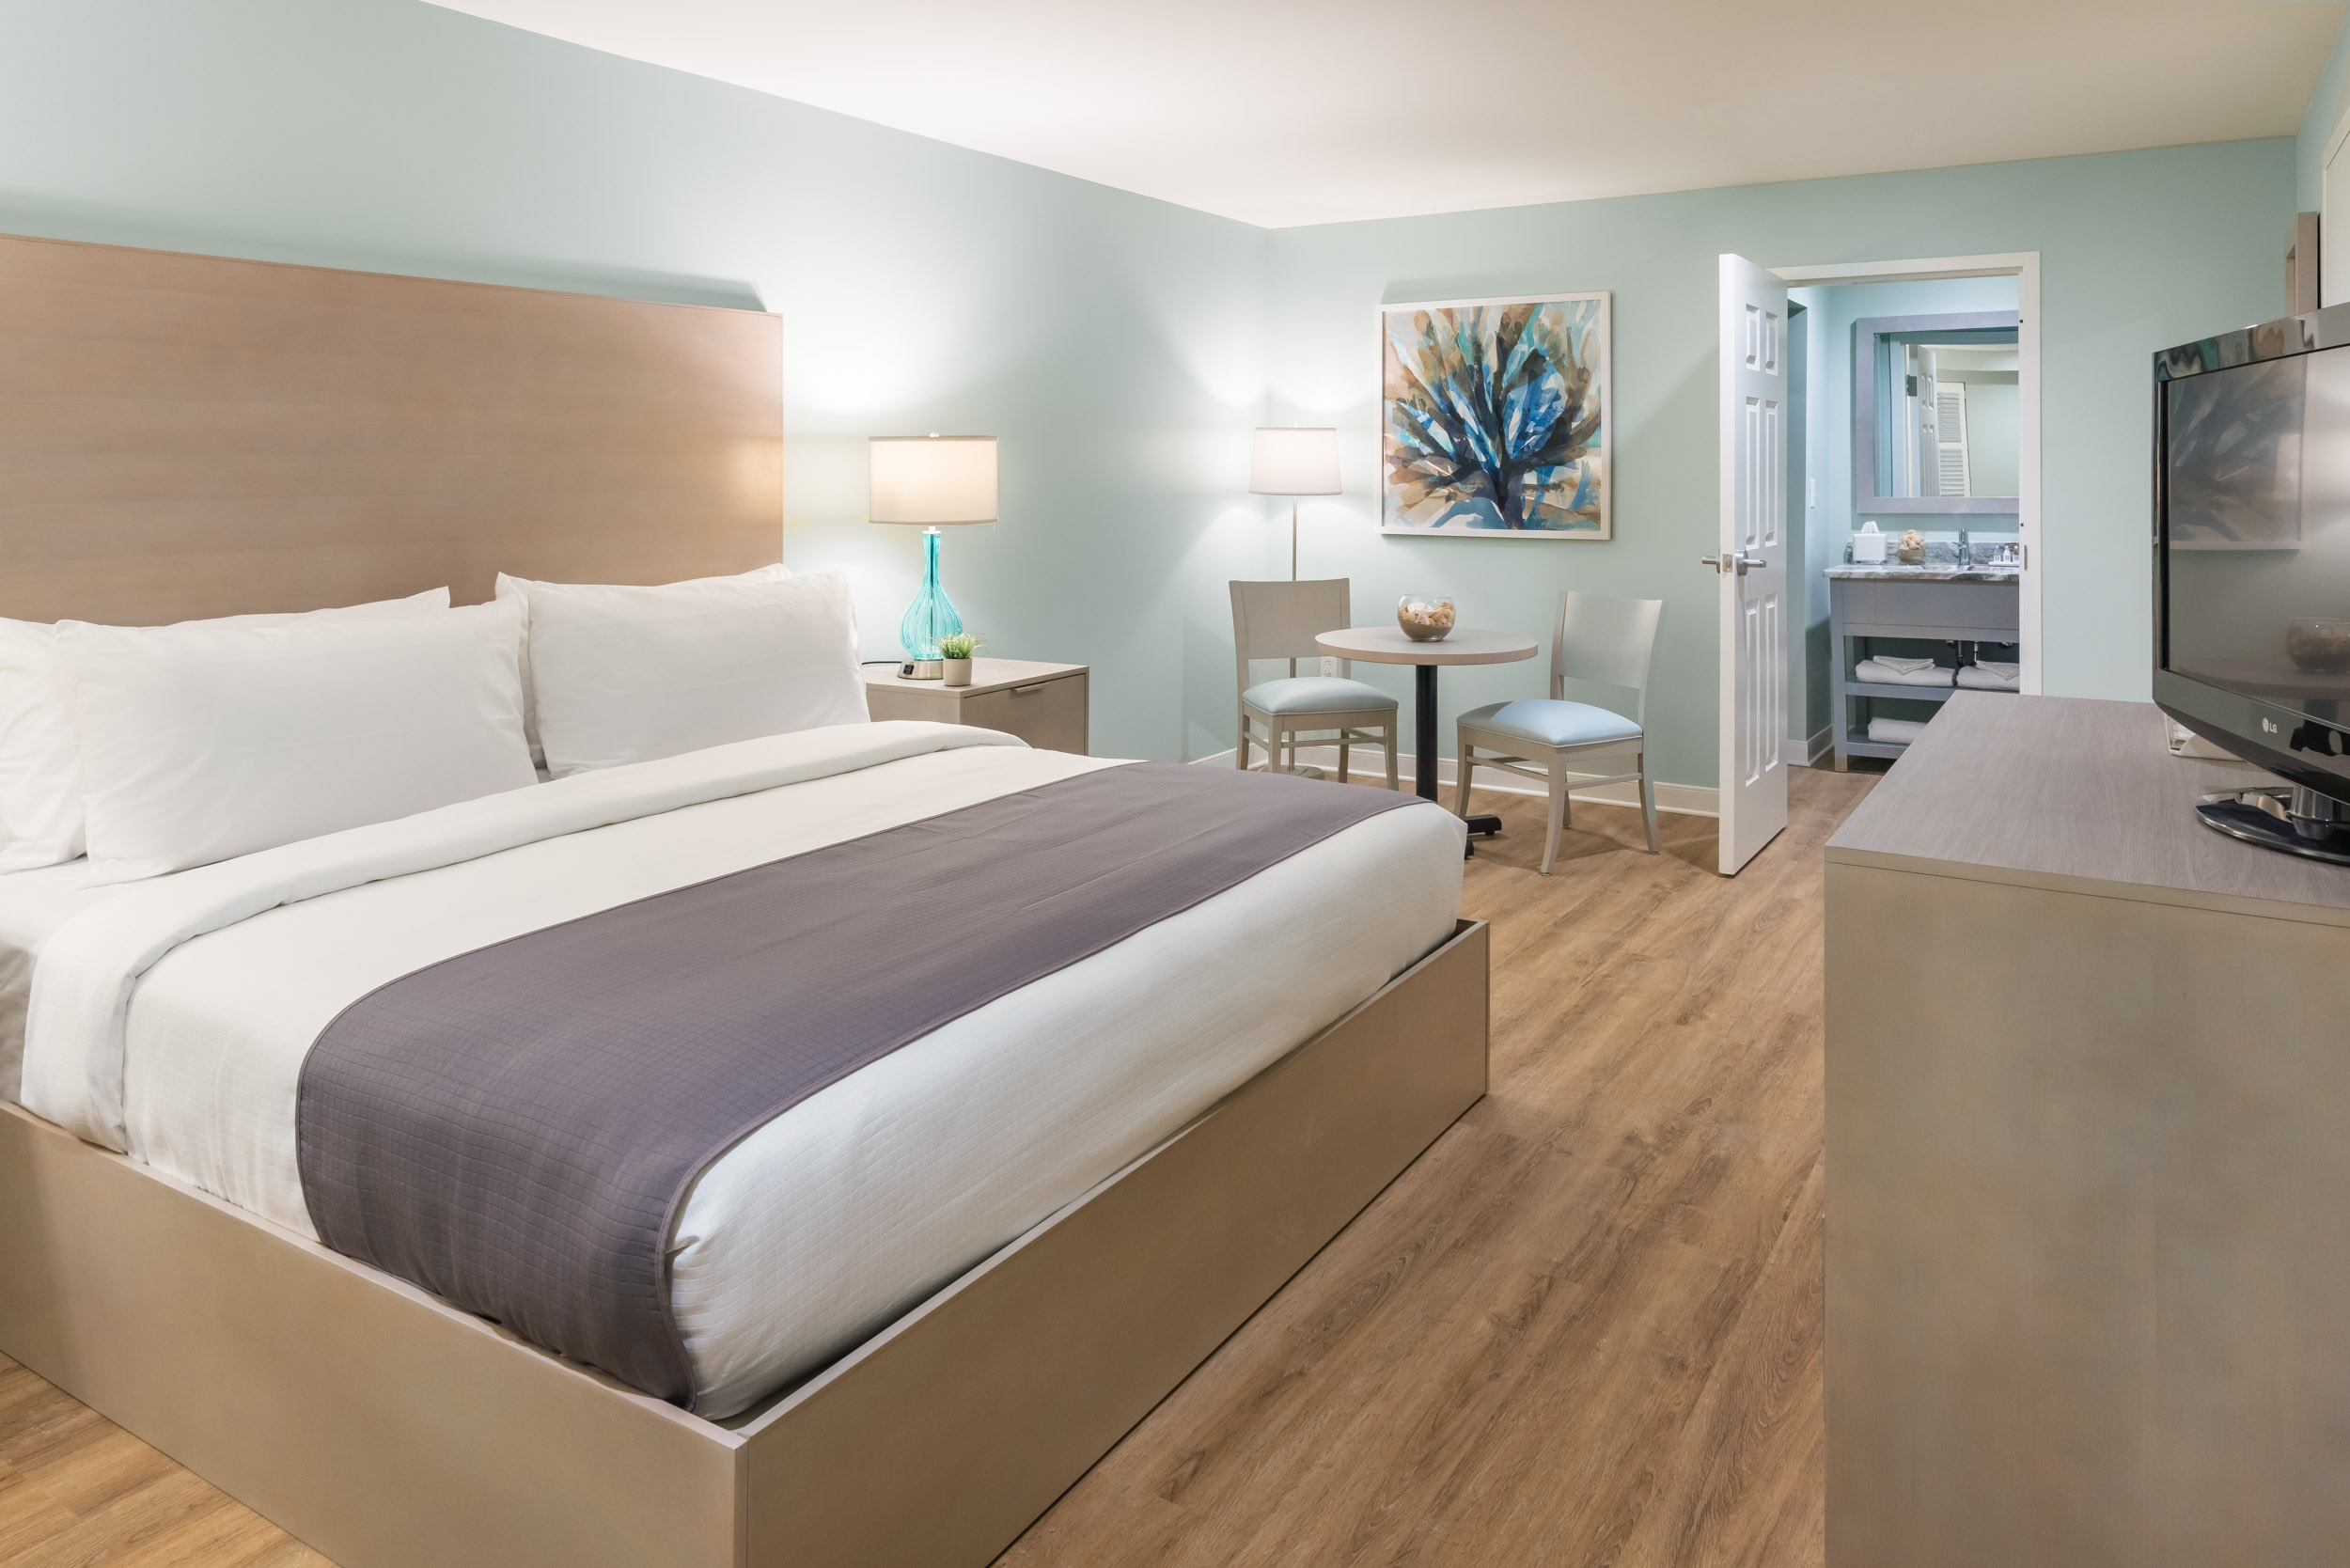 Isle of Palms Hotels | Photo Gallery | The Palms Hotel